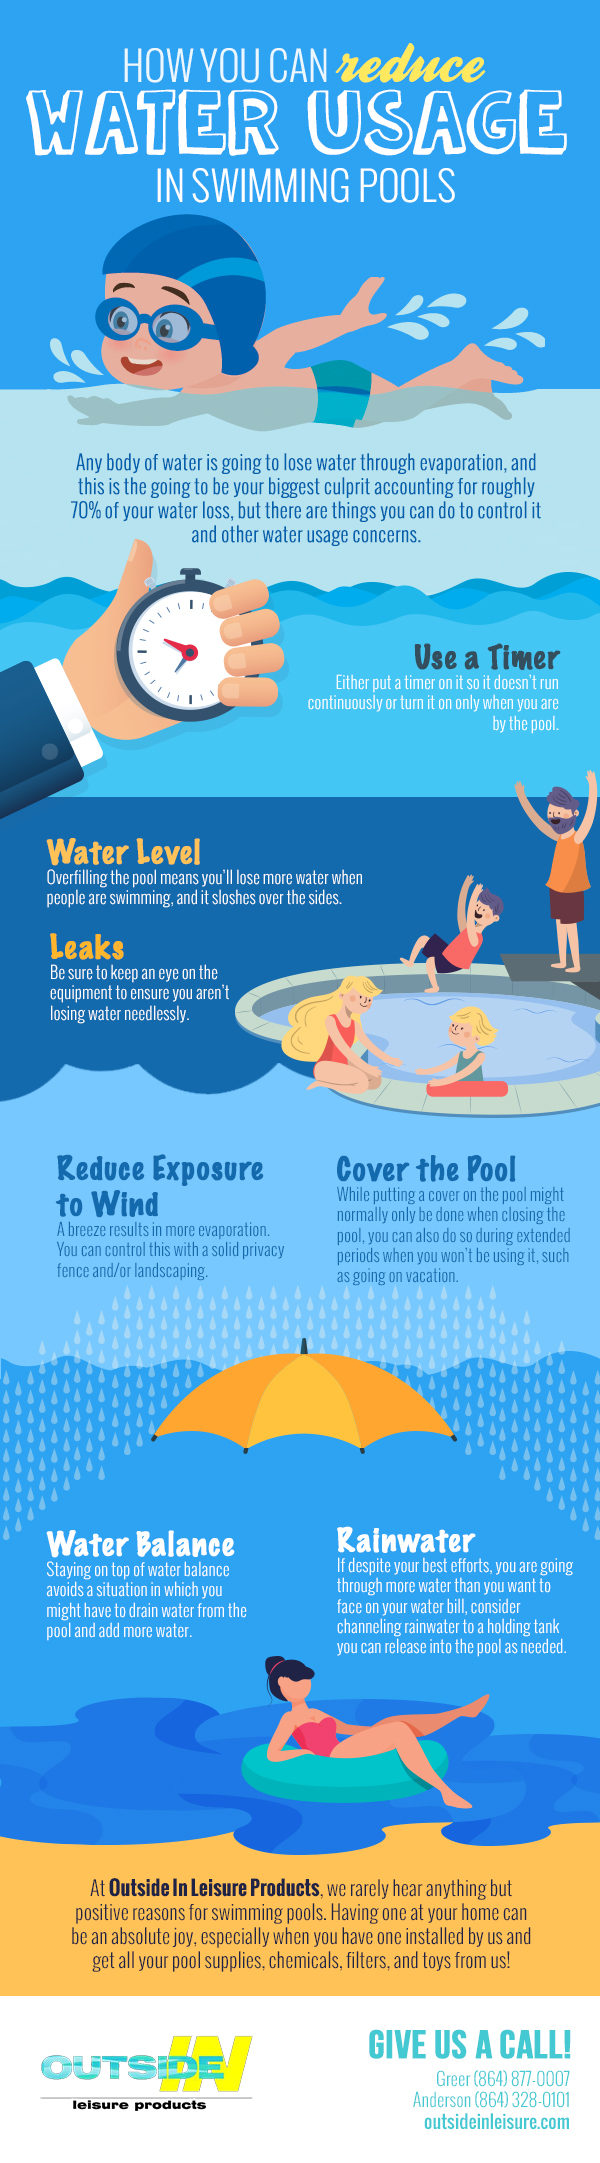 How can you reduce water usage in swimming pools